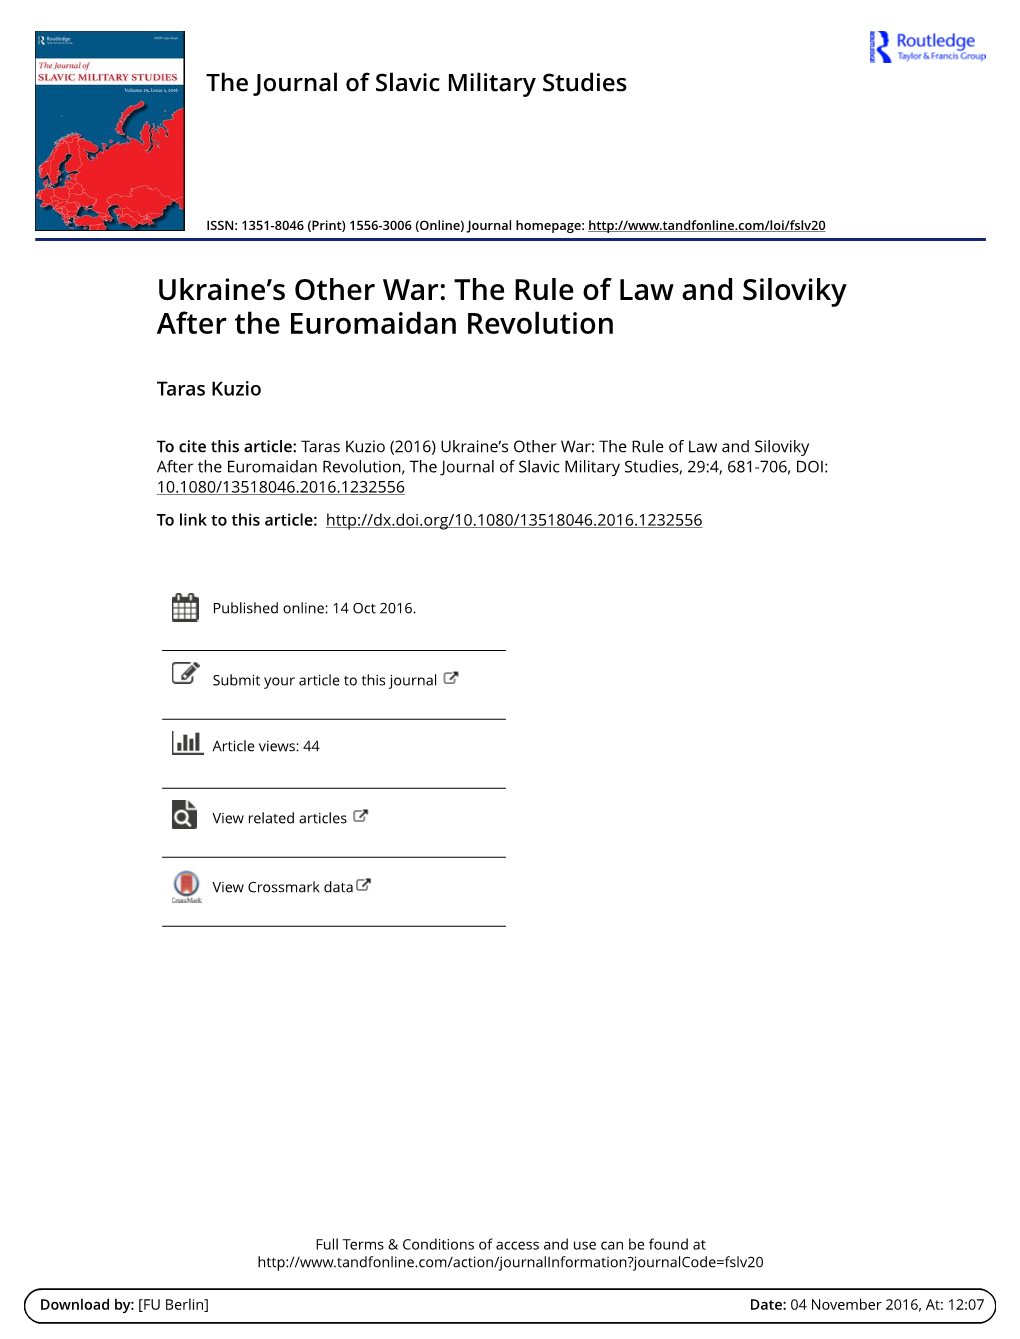 Ukraine's Other War: the Rule of Law and Siloviky After the Euromaidan